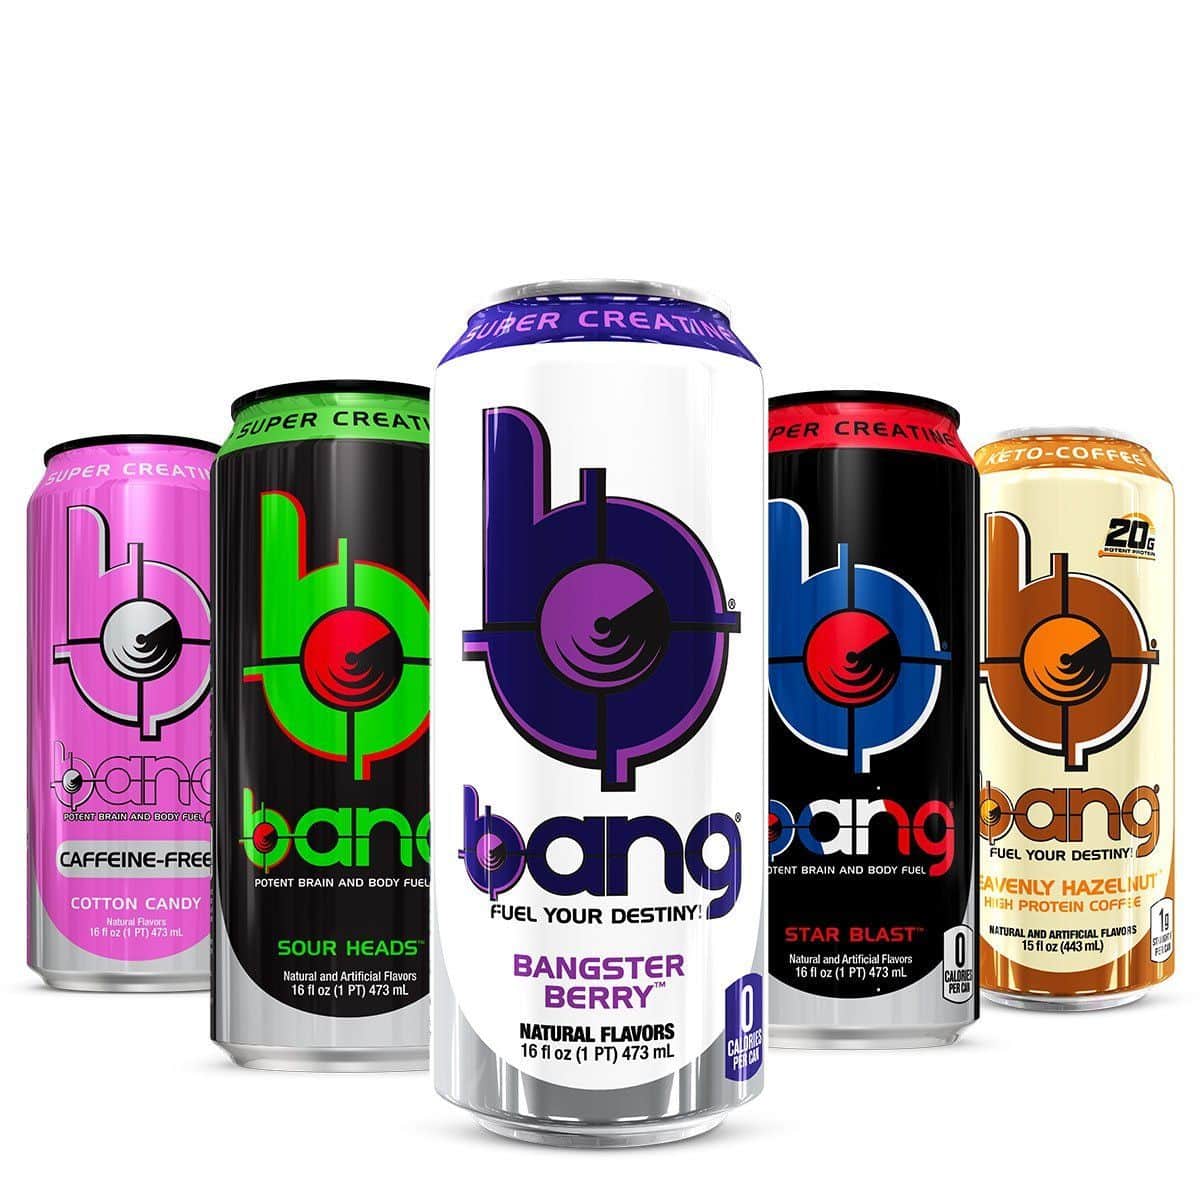 How Much Caffeine Does A Bang Energy Shot Have